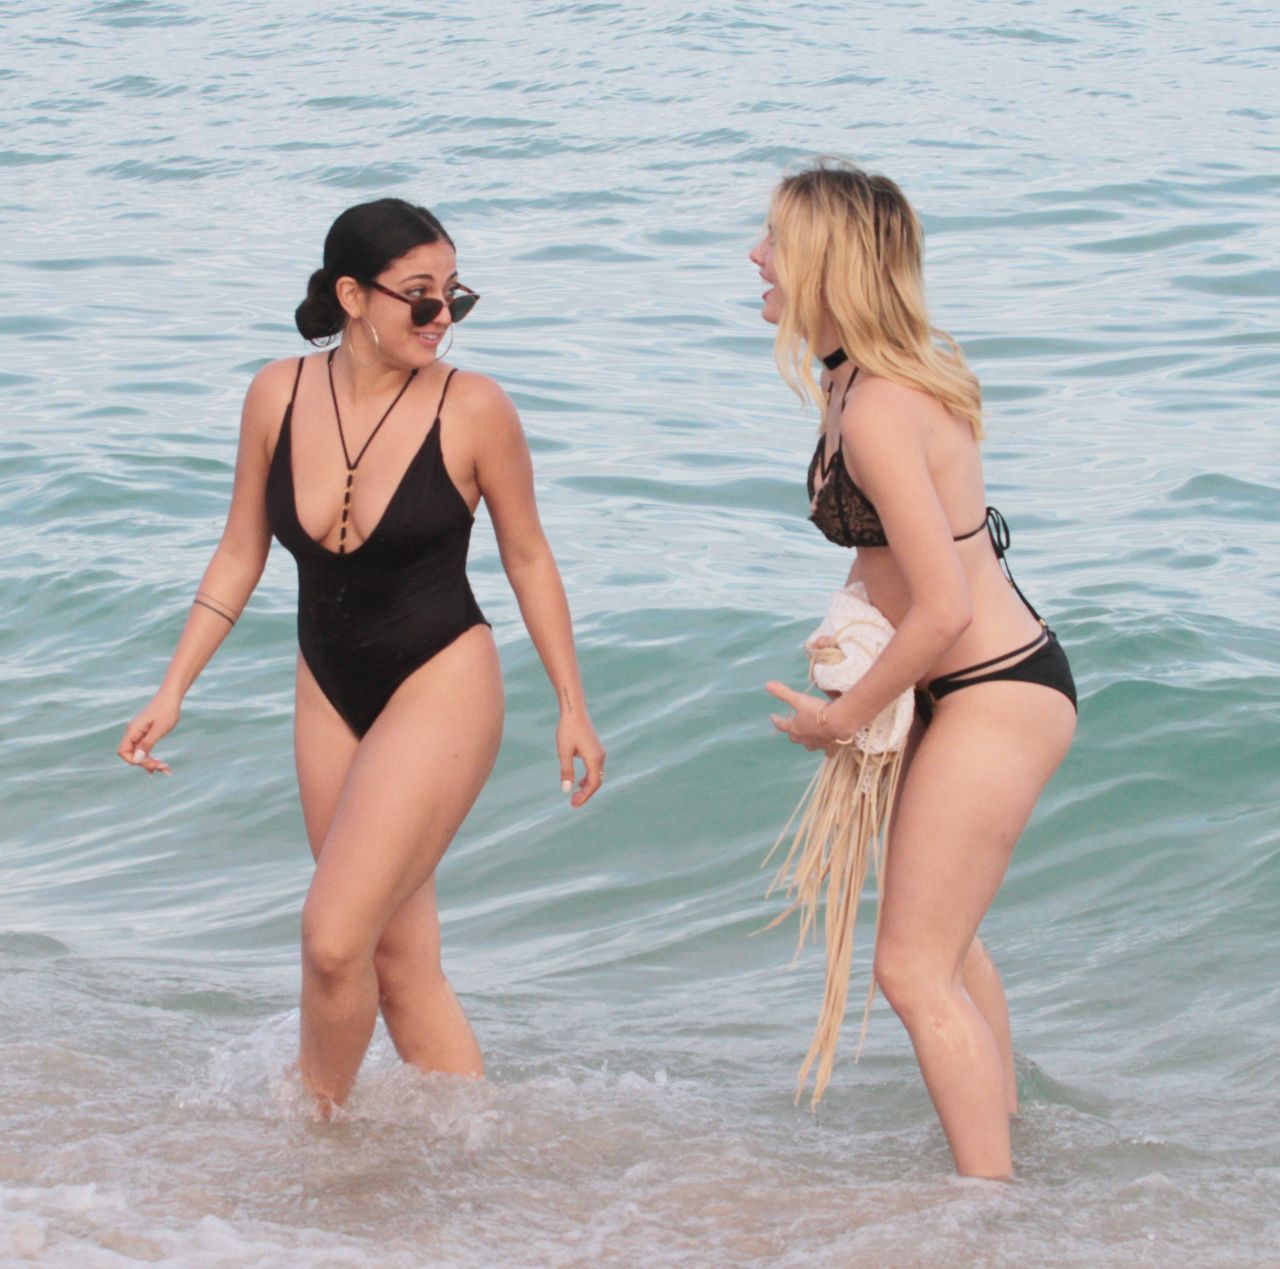 lele-pons-and-inanna-on-the-beach-in-miami-beach-6.jpg